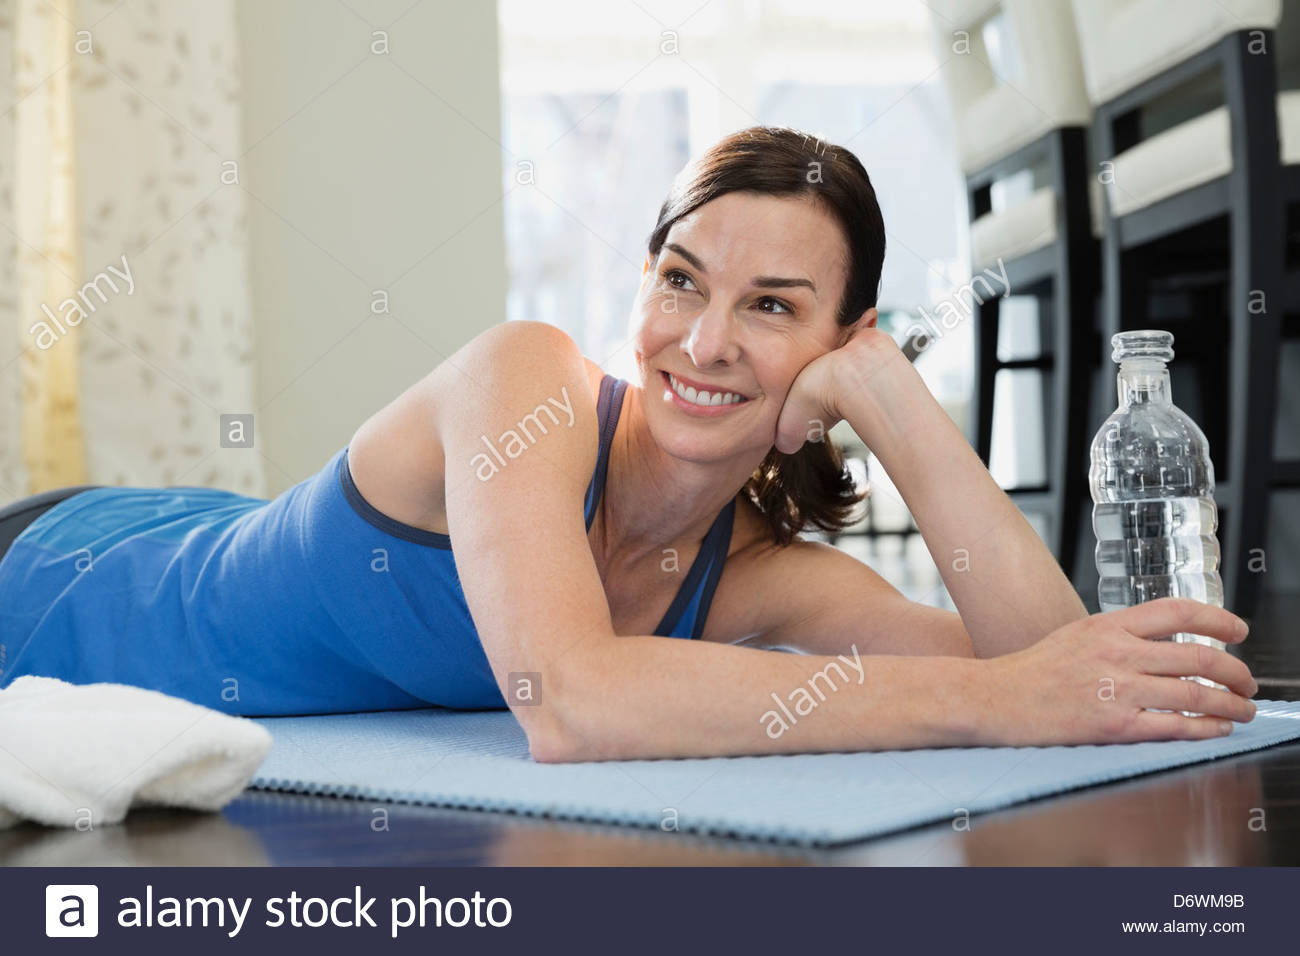 Happy mature woman resting on exercise mat Stock Photo